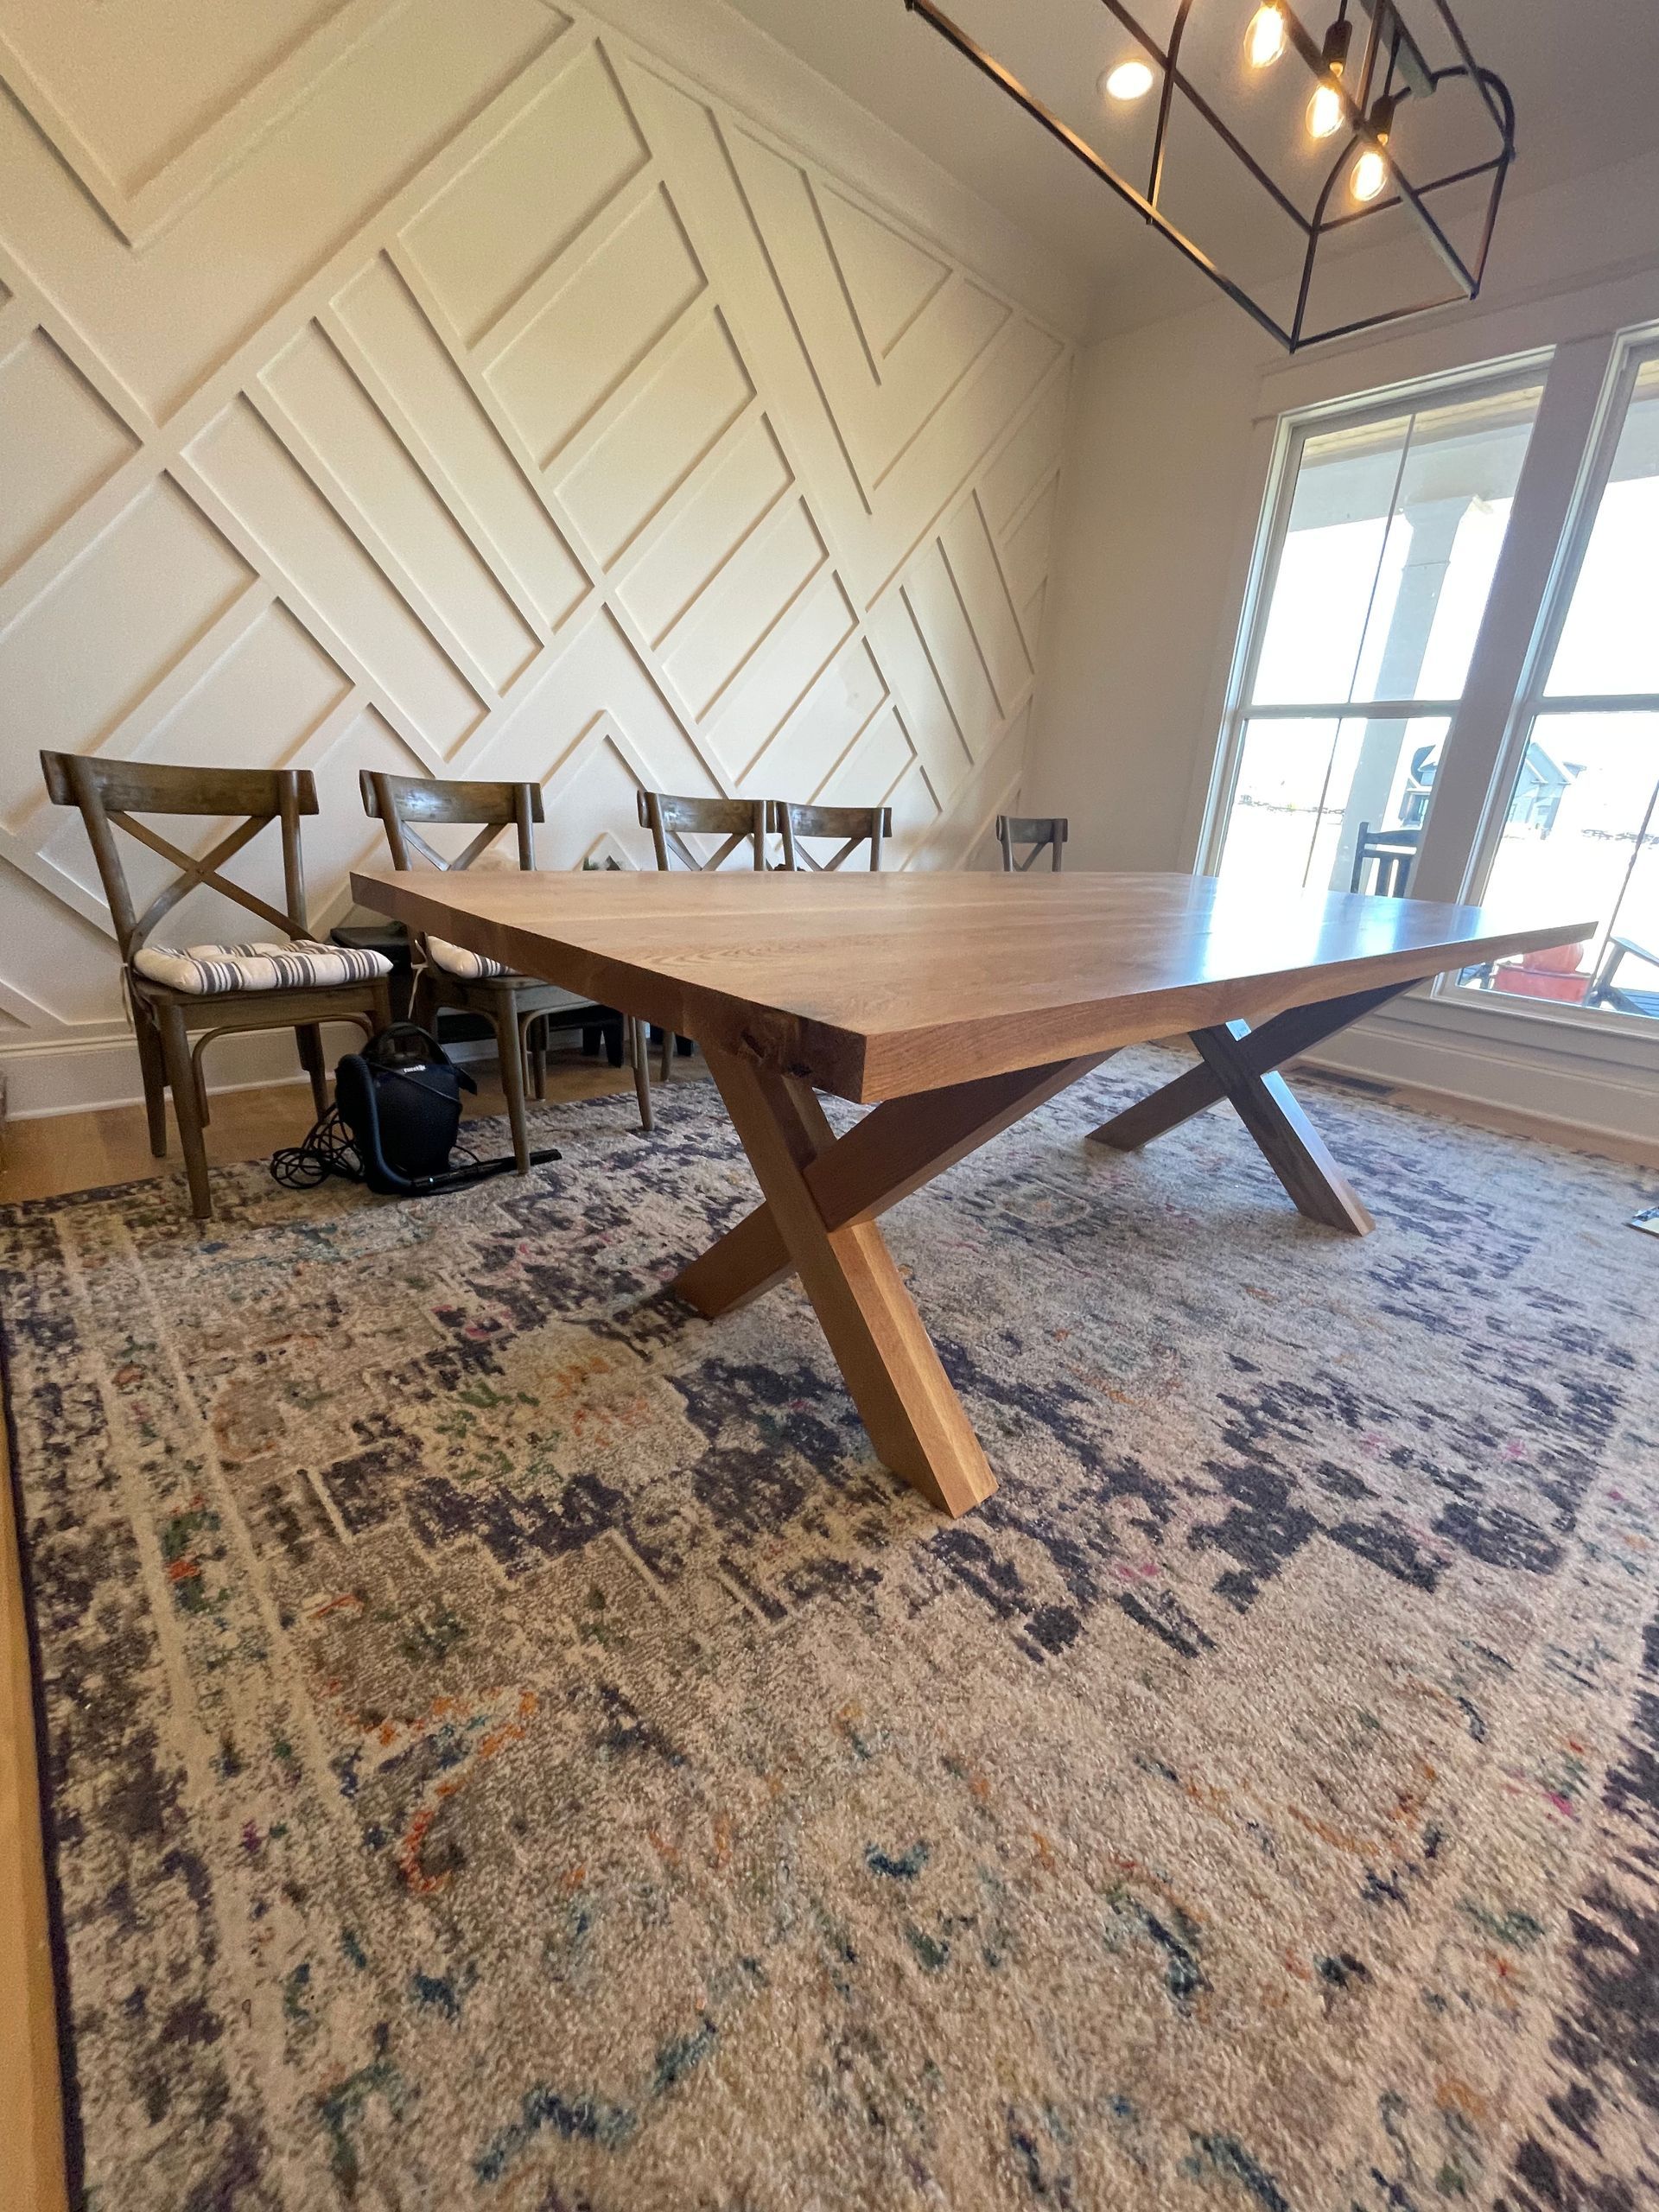 A wooden table is sitting on top of a rug in a dining room.